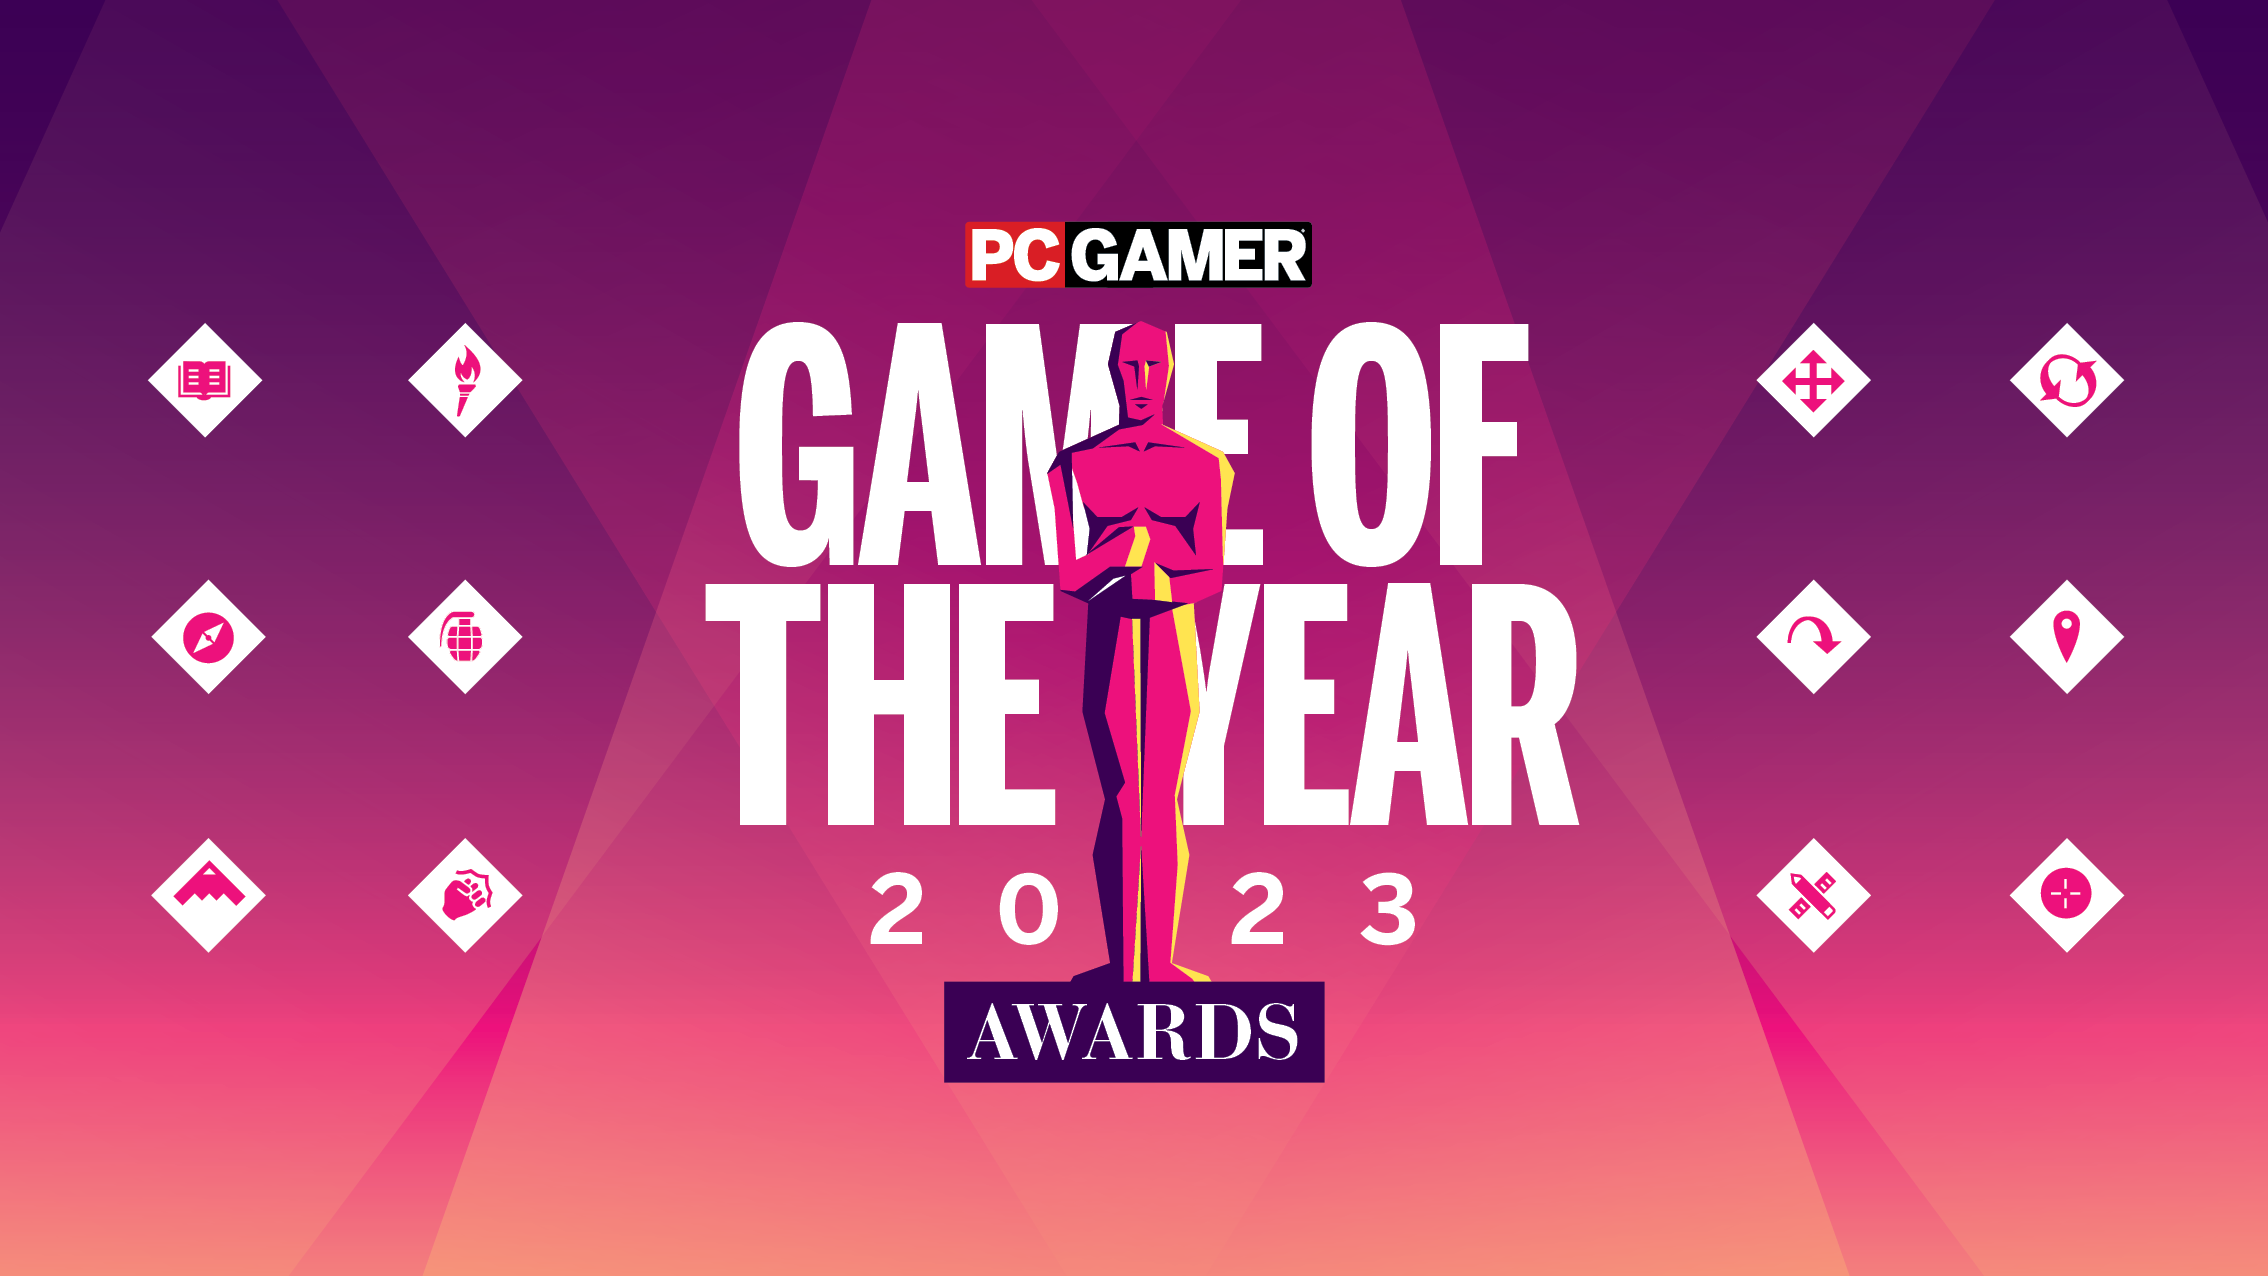 PC Gamer's Game of the Year Awards 2021